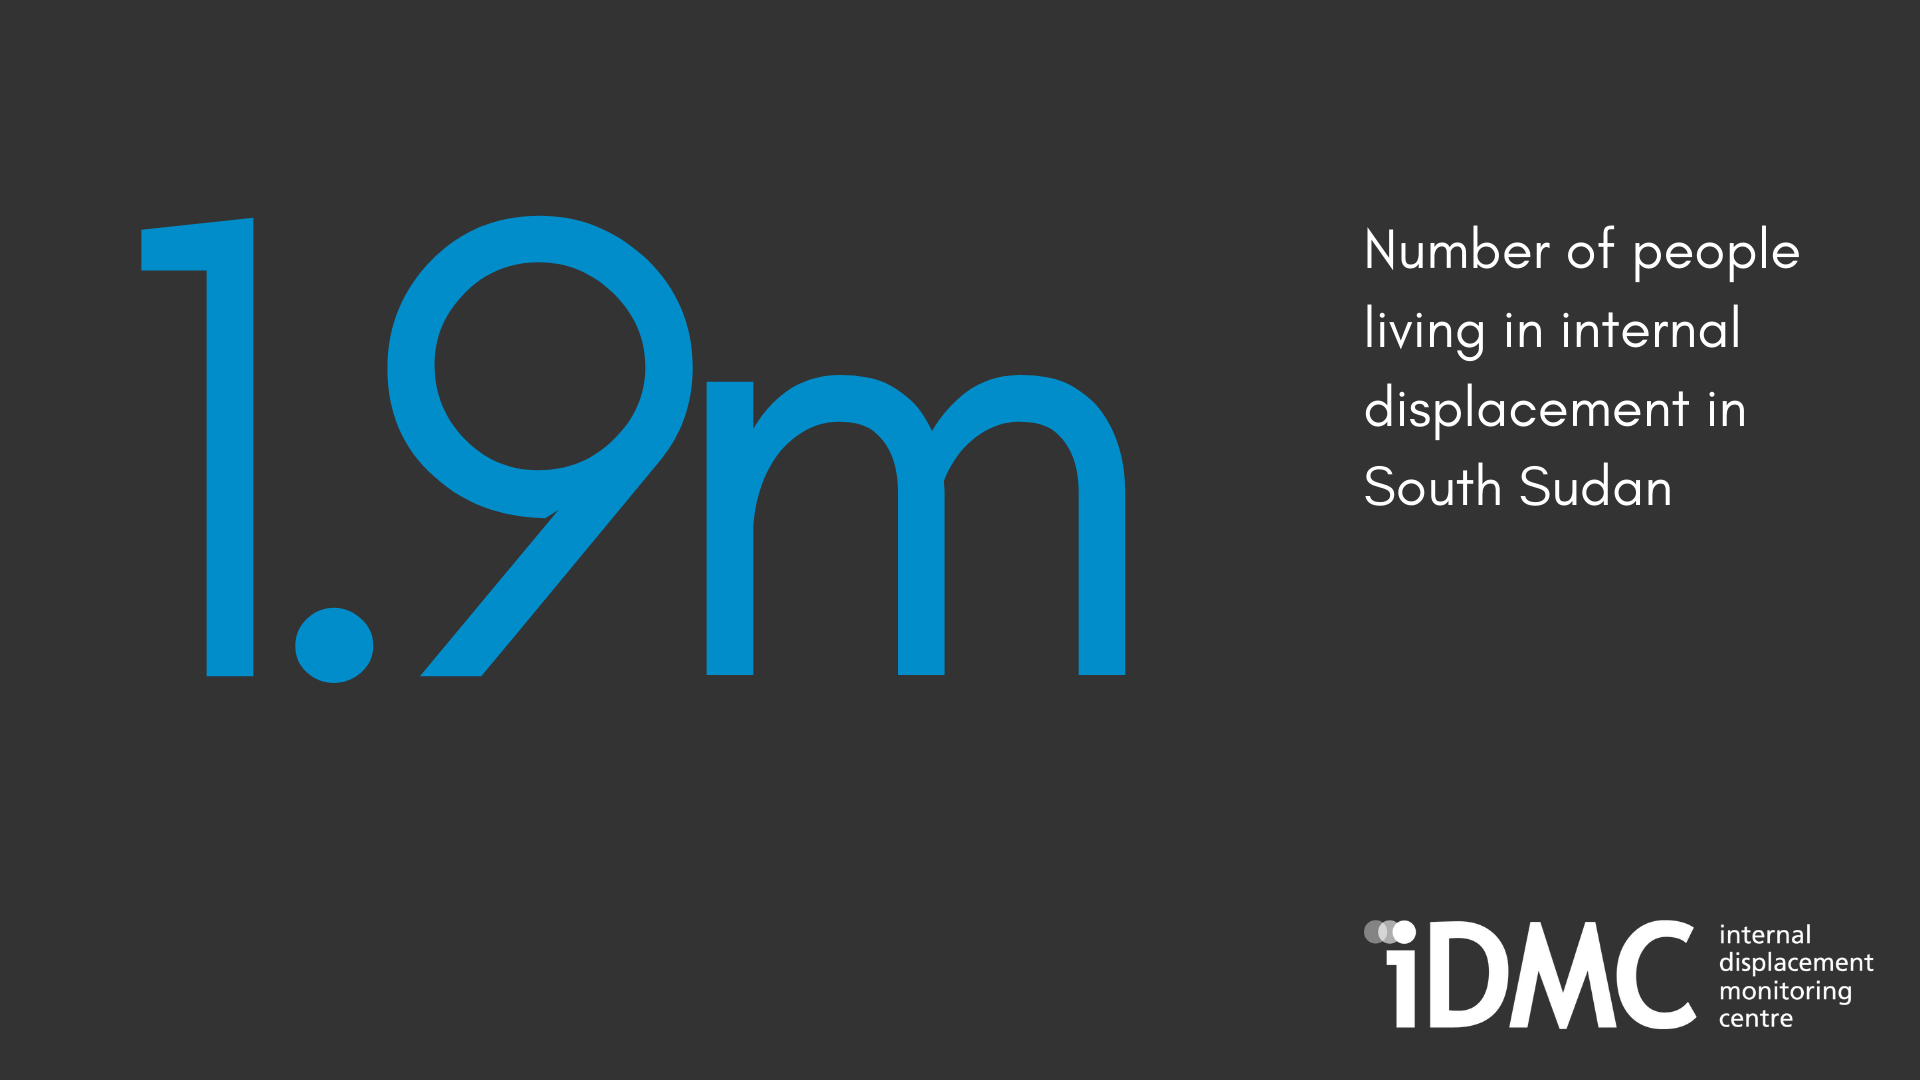 Statistic card: 1.9 million people are living in internal displacement in South Sudan